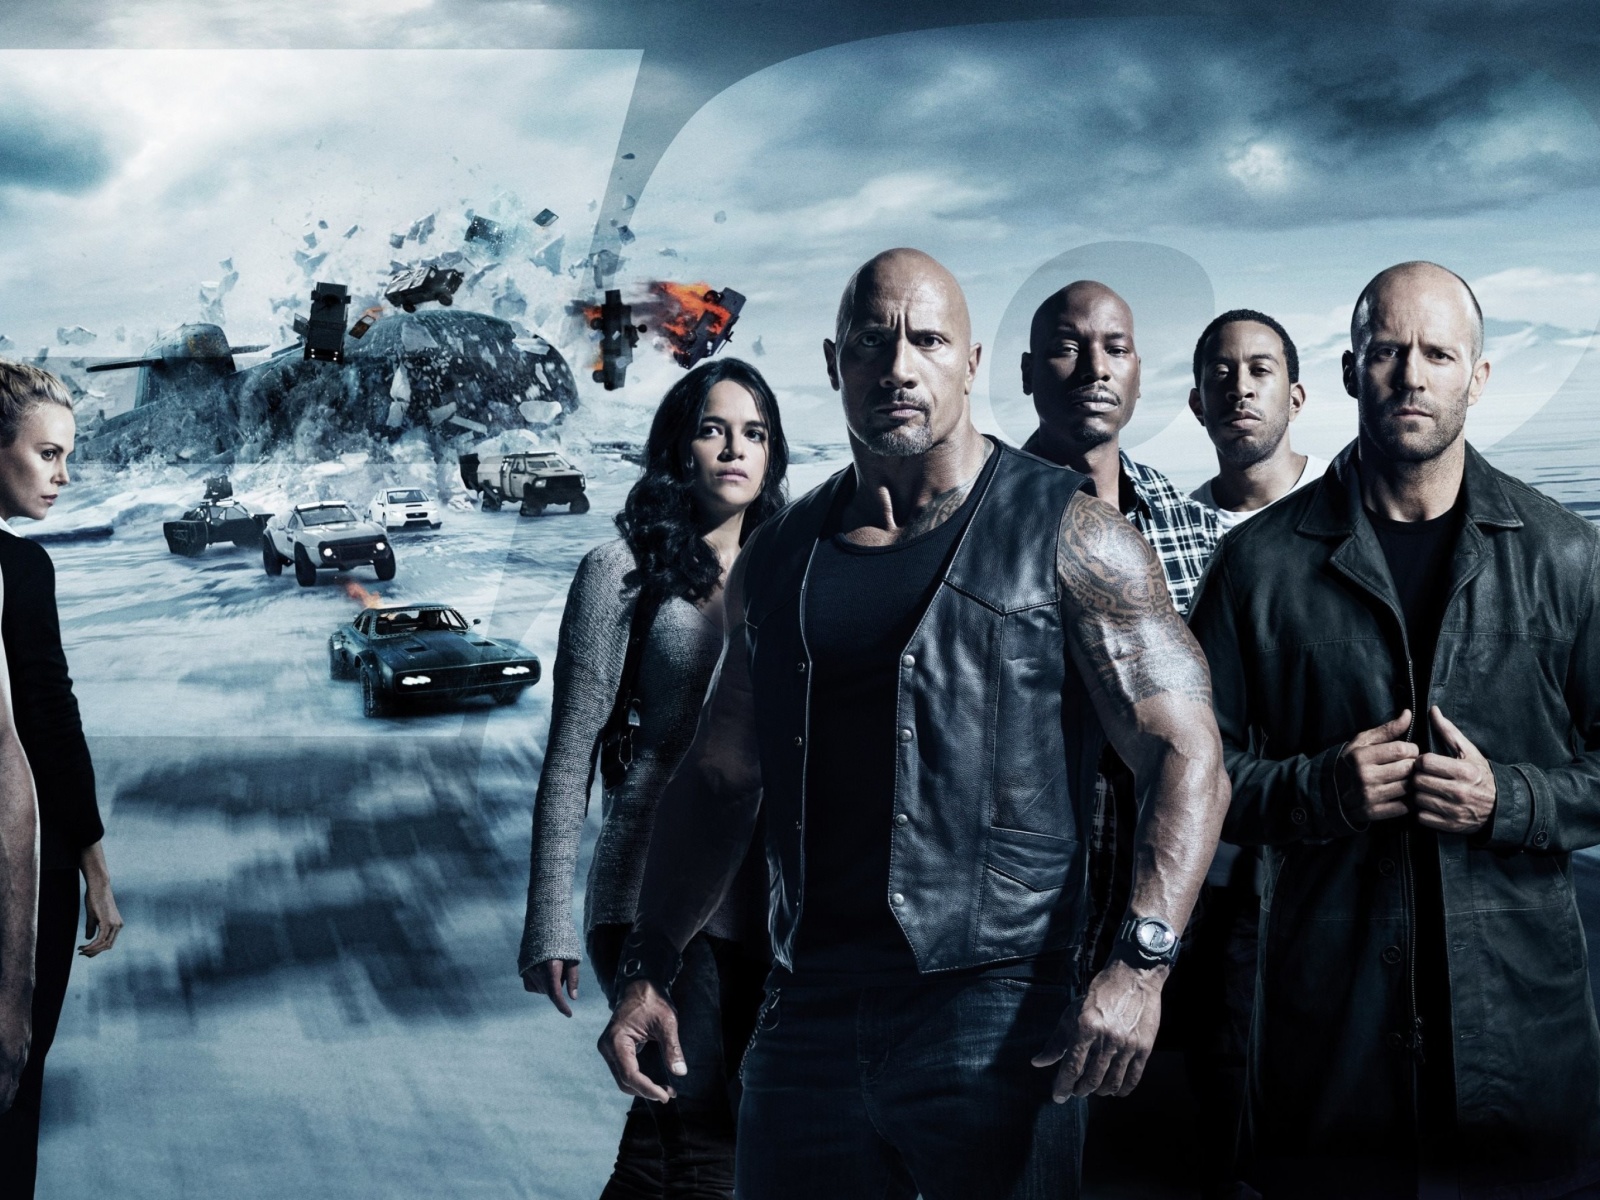 Обои The Fate of the Furious with Vin Diesel, Dwayne Johnson, Charlize Theron 1600x1200